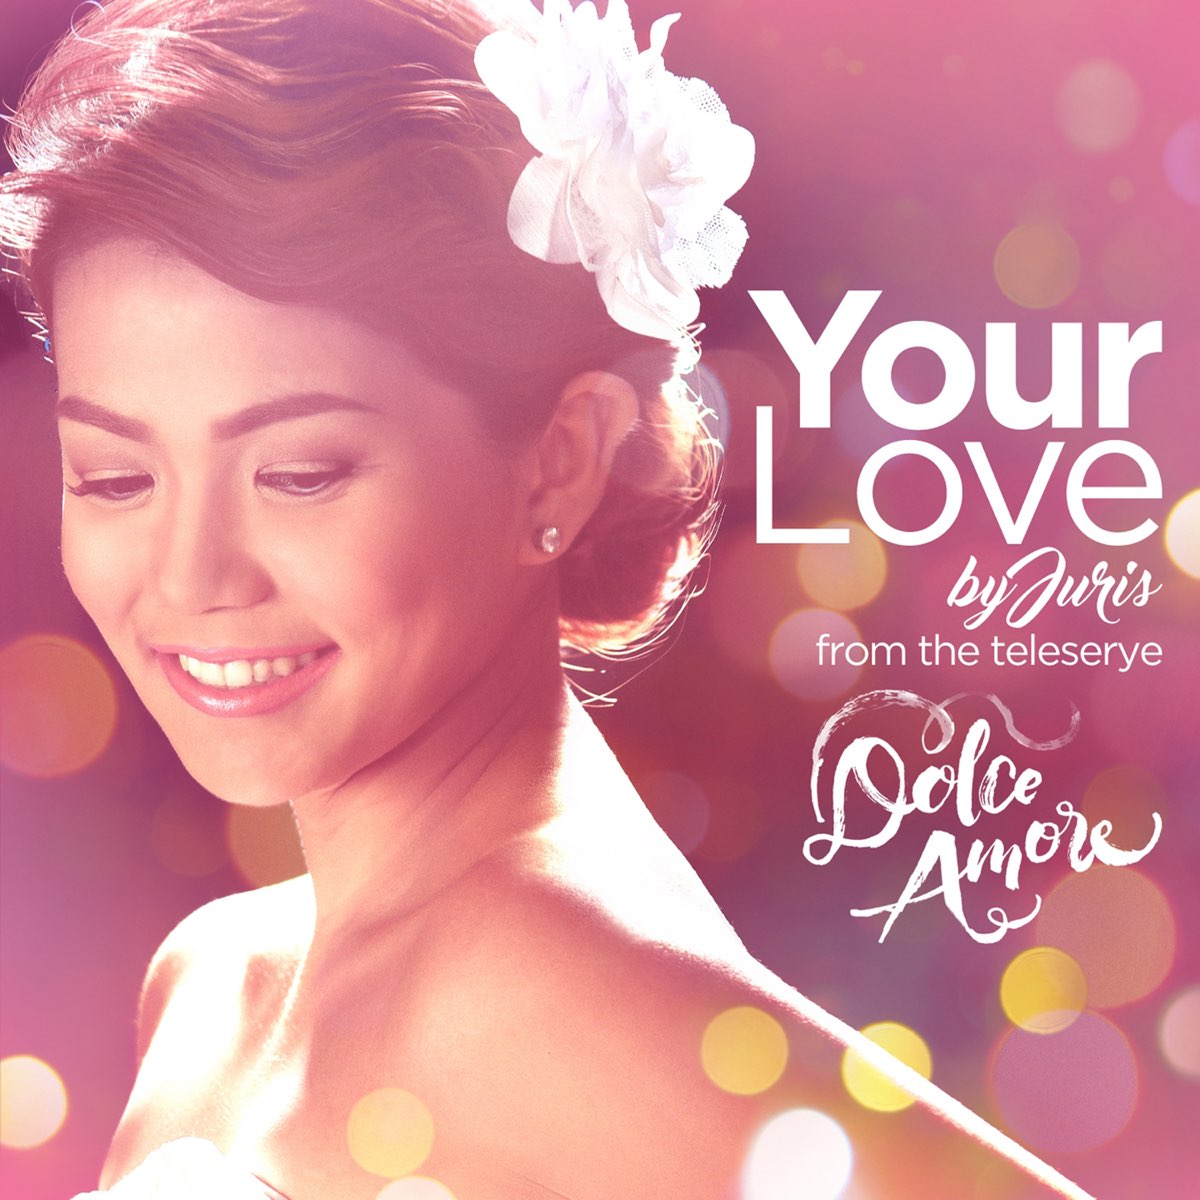 Your Love (from Dolce Amore) - Single - Album by Juris - Apple Music